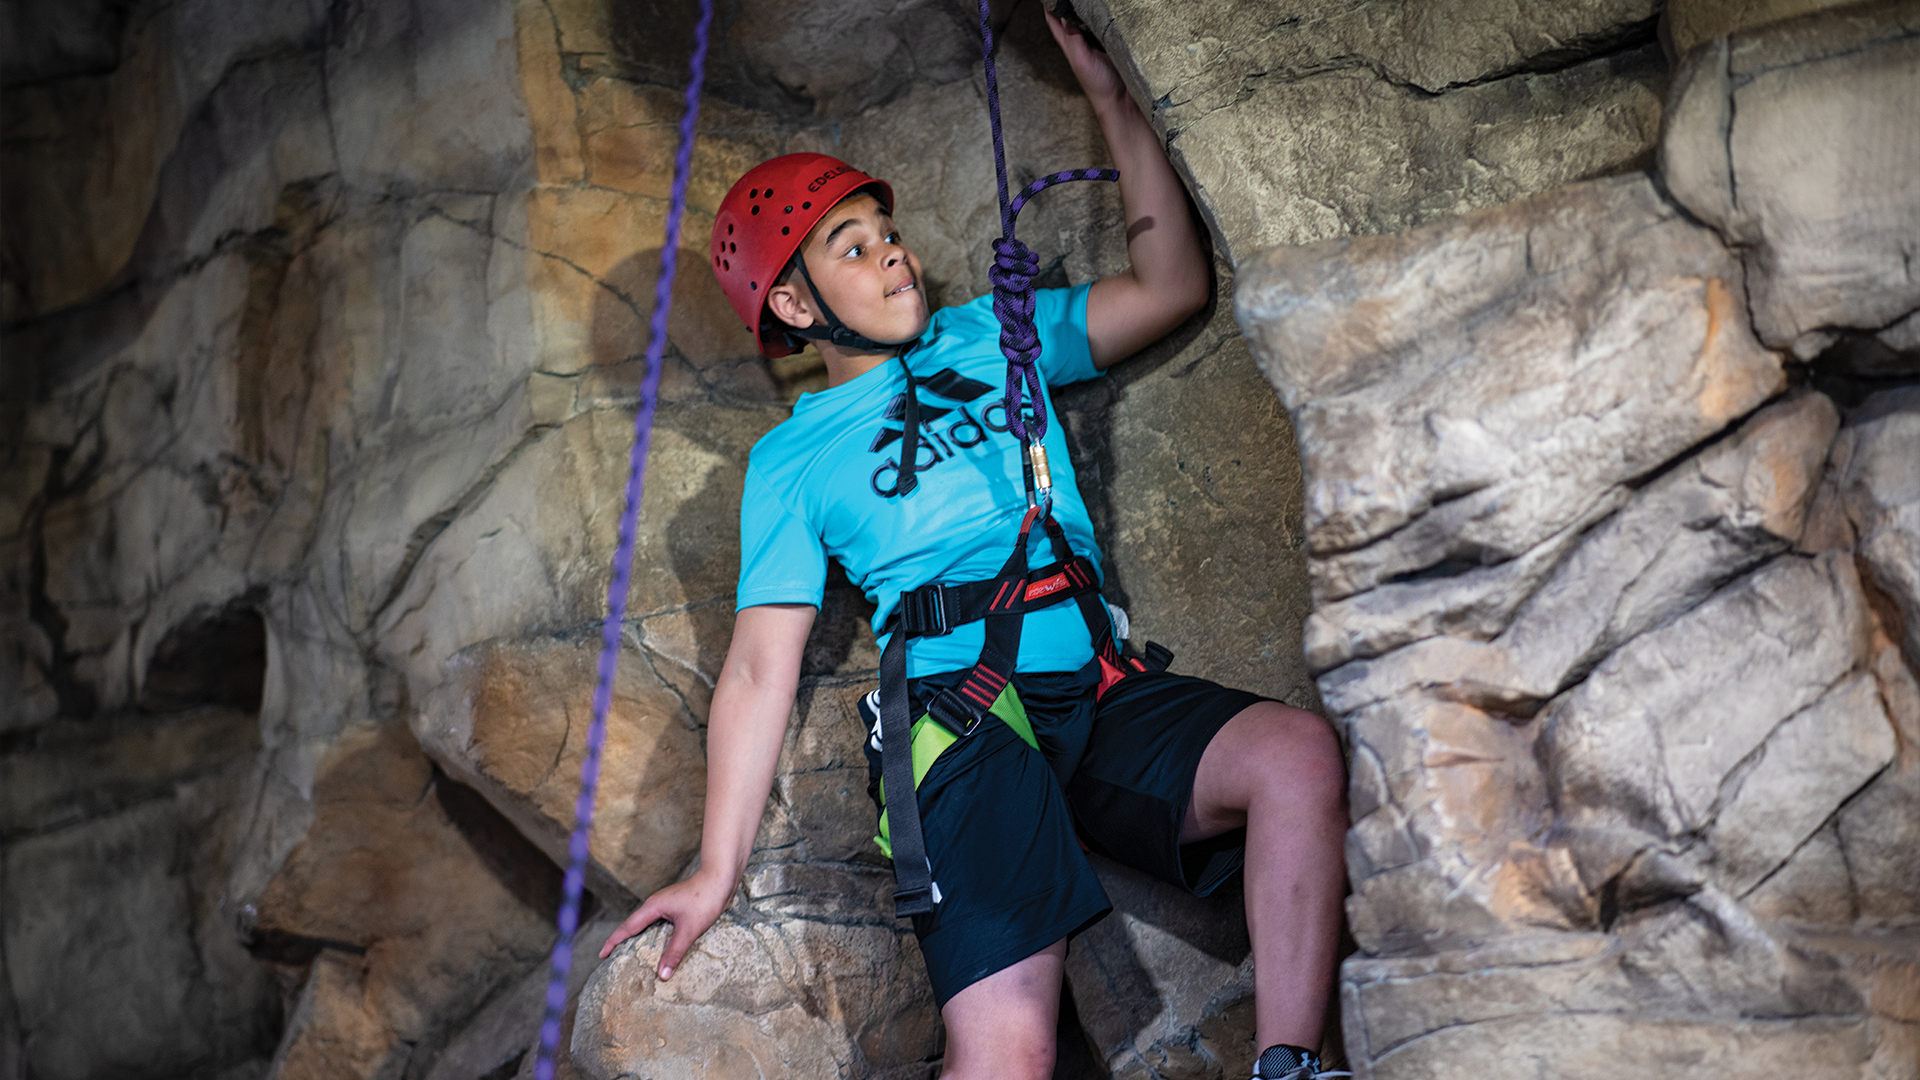 A photo of a young boy in a helmet and harness hooked into a rope climbing up an indoor rock wall